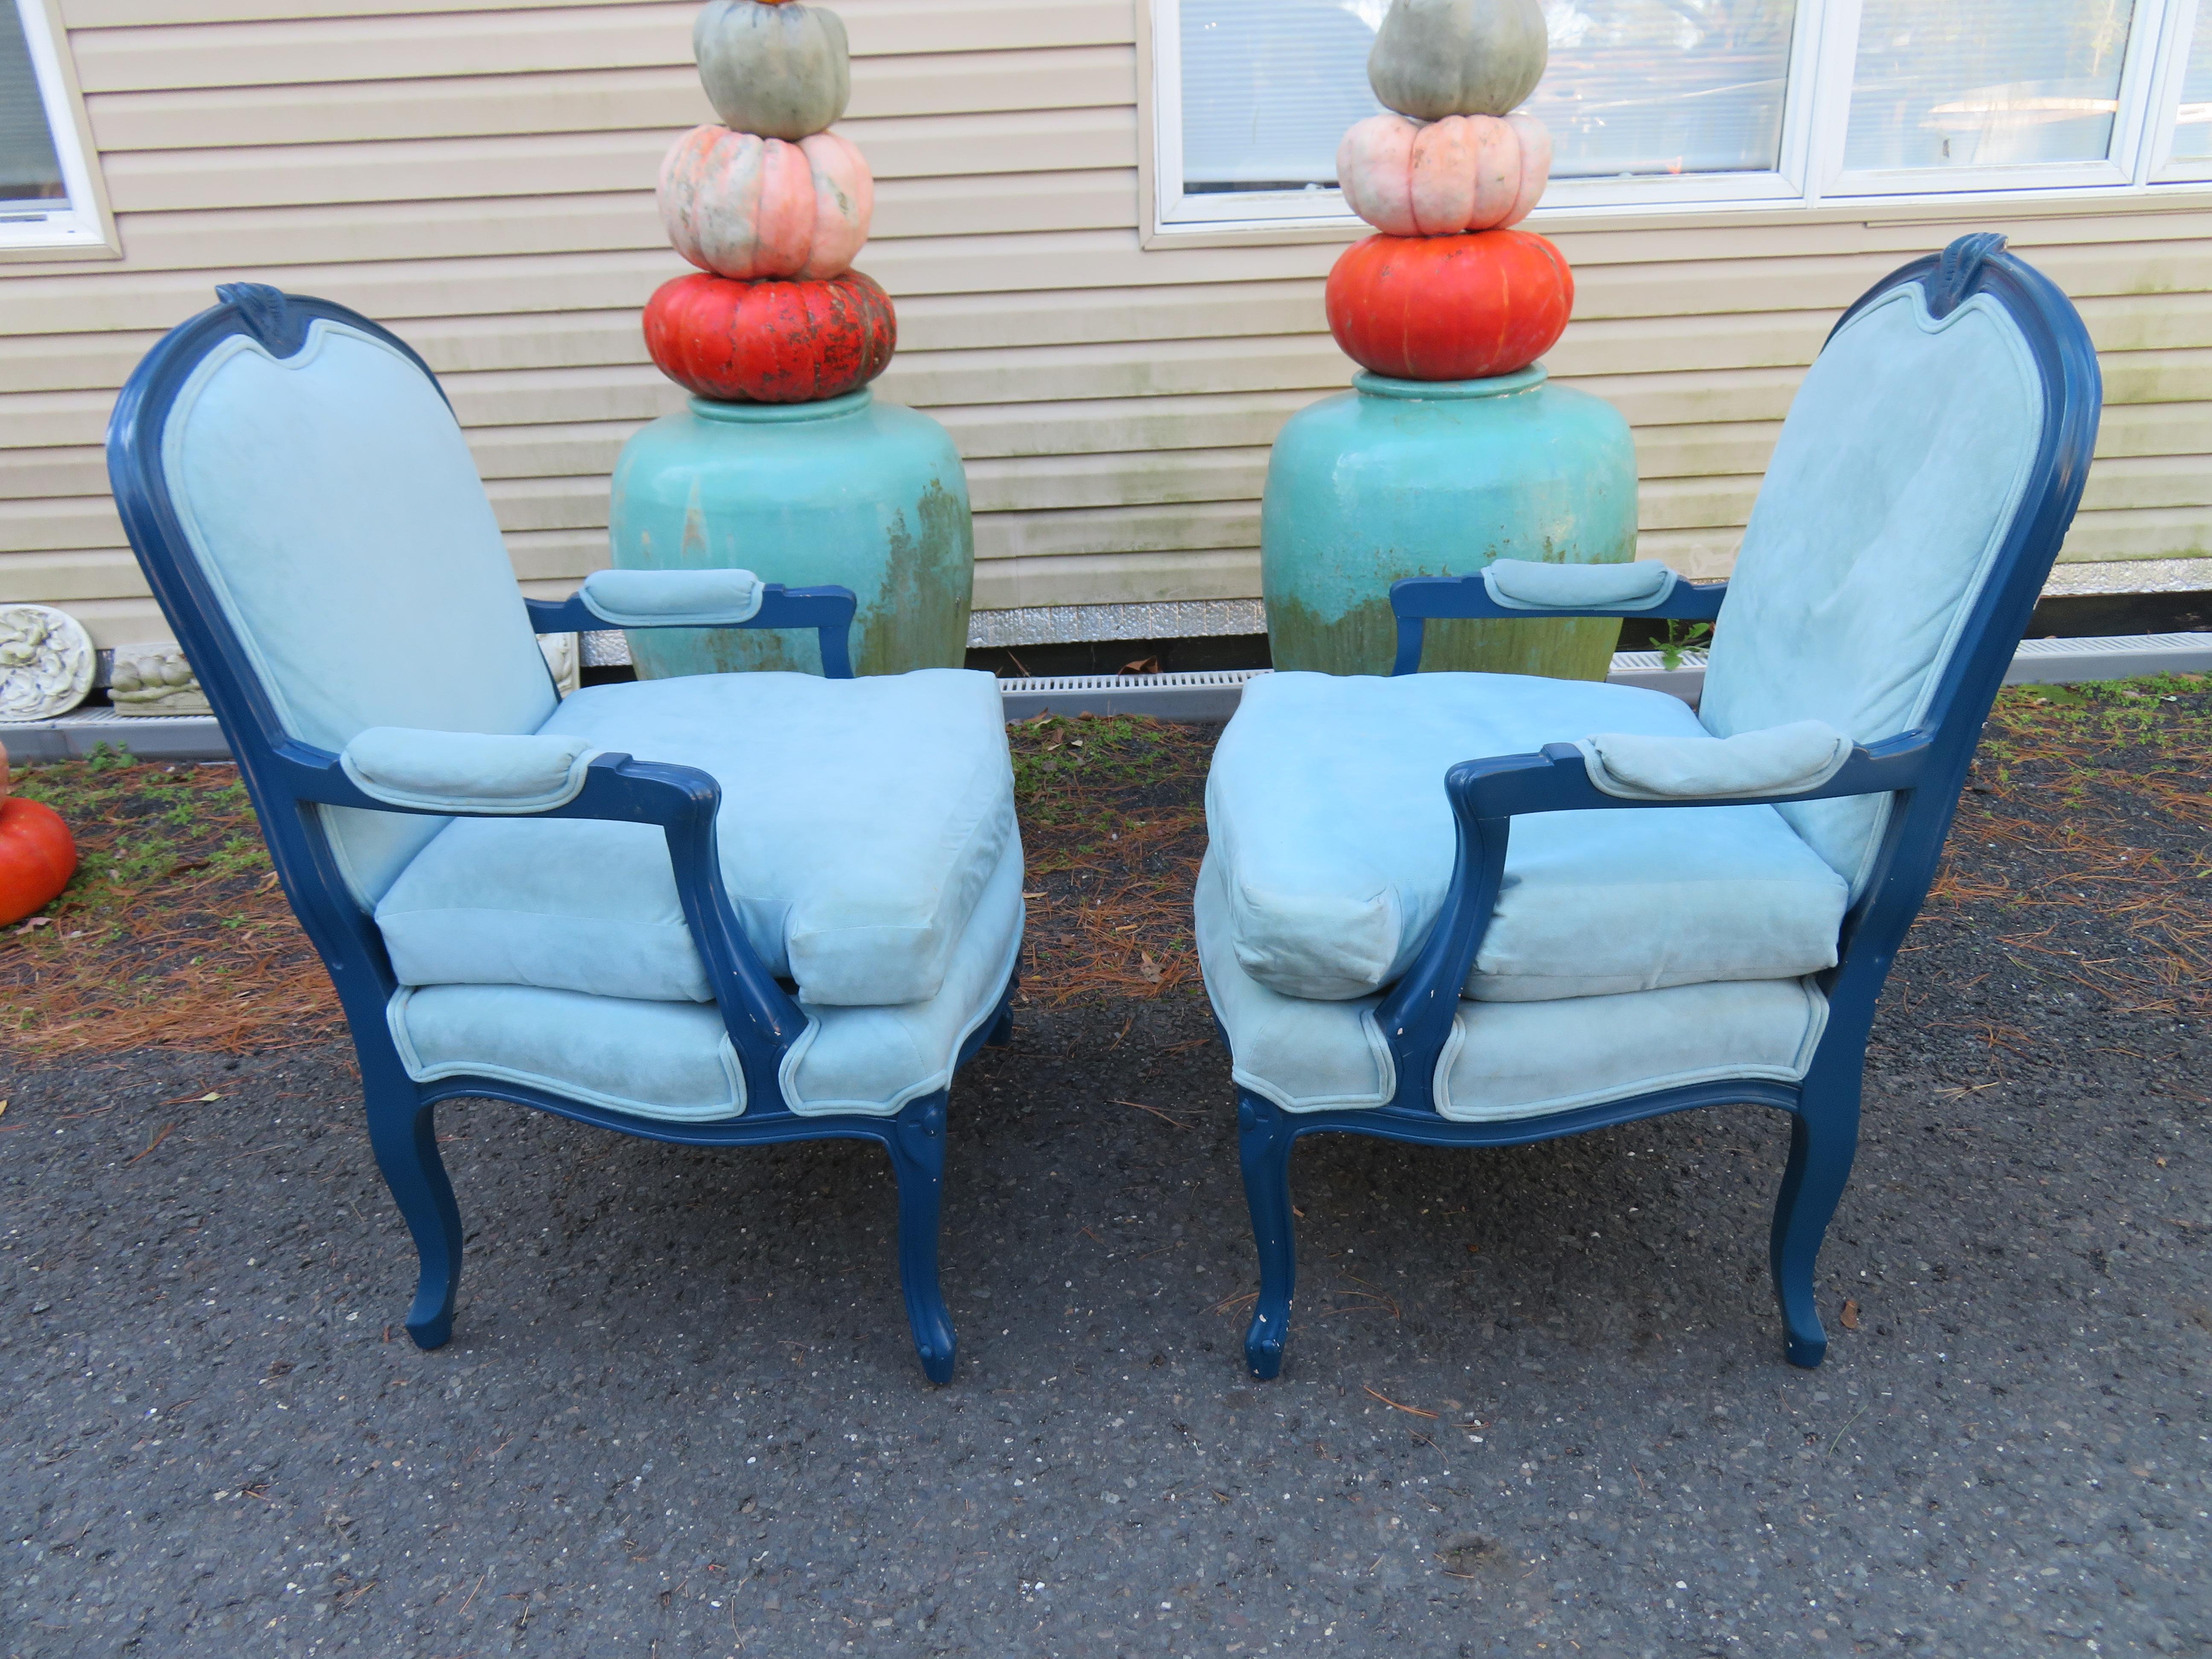 Exciting pair of Erwin Lambeth Louis XV Fauteuil chairs, circa 60's. We absolutely love the original Persian blue lacquered frames with the baby blue ultra-suede upholstery. This combination is just so mid-century, The chairs measure 38